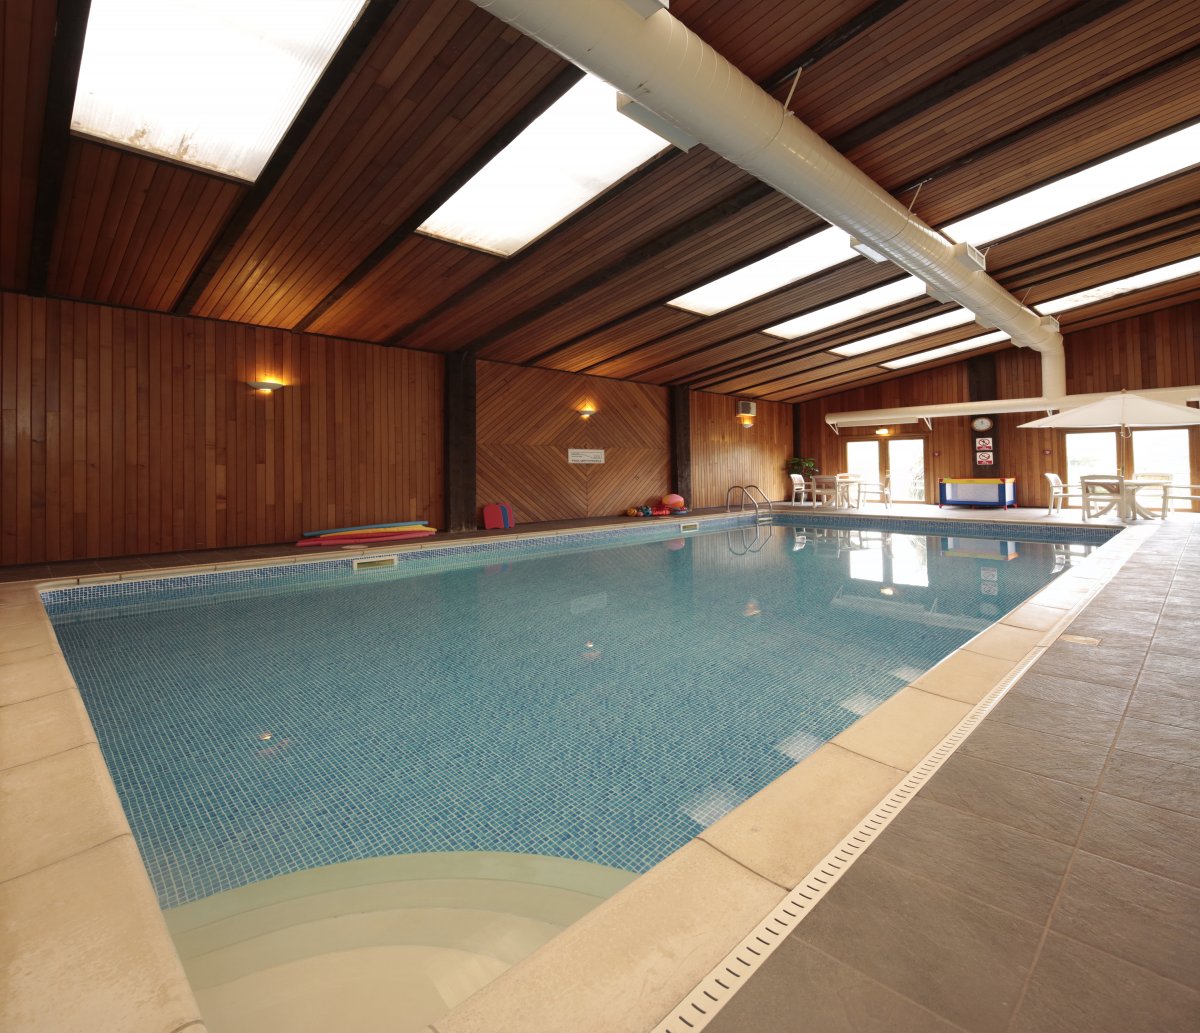 Long Barn Cottages indoor heated swimming pool